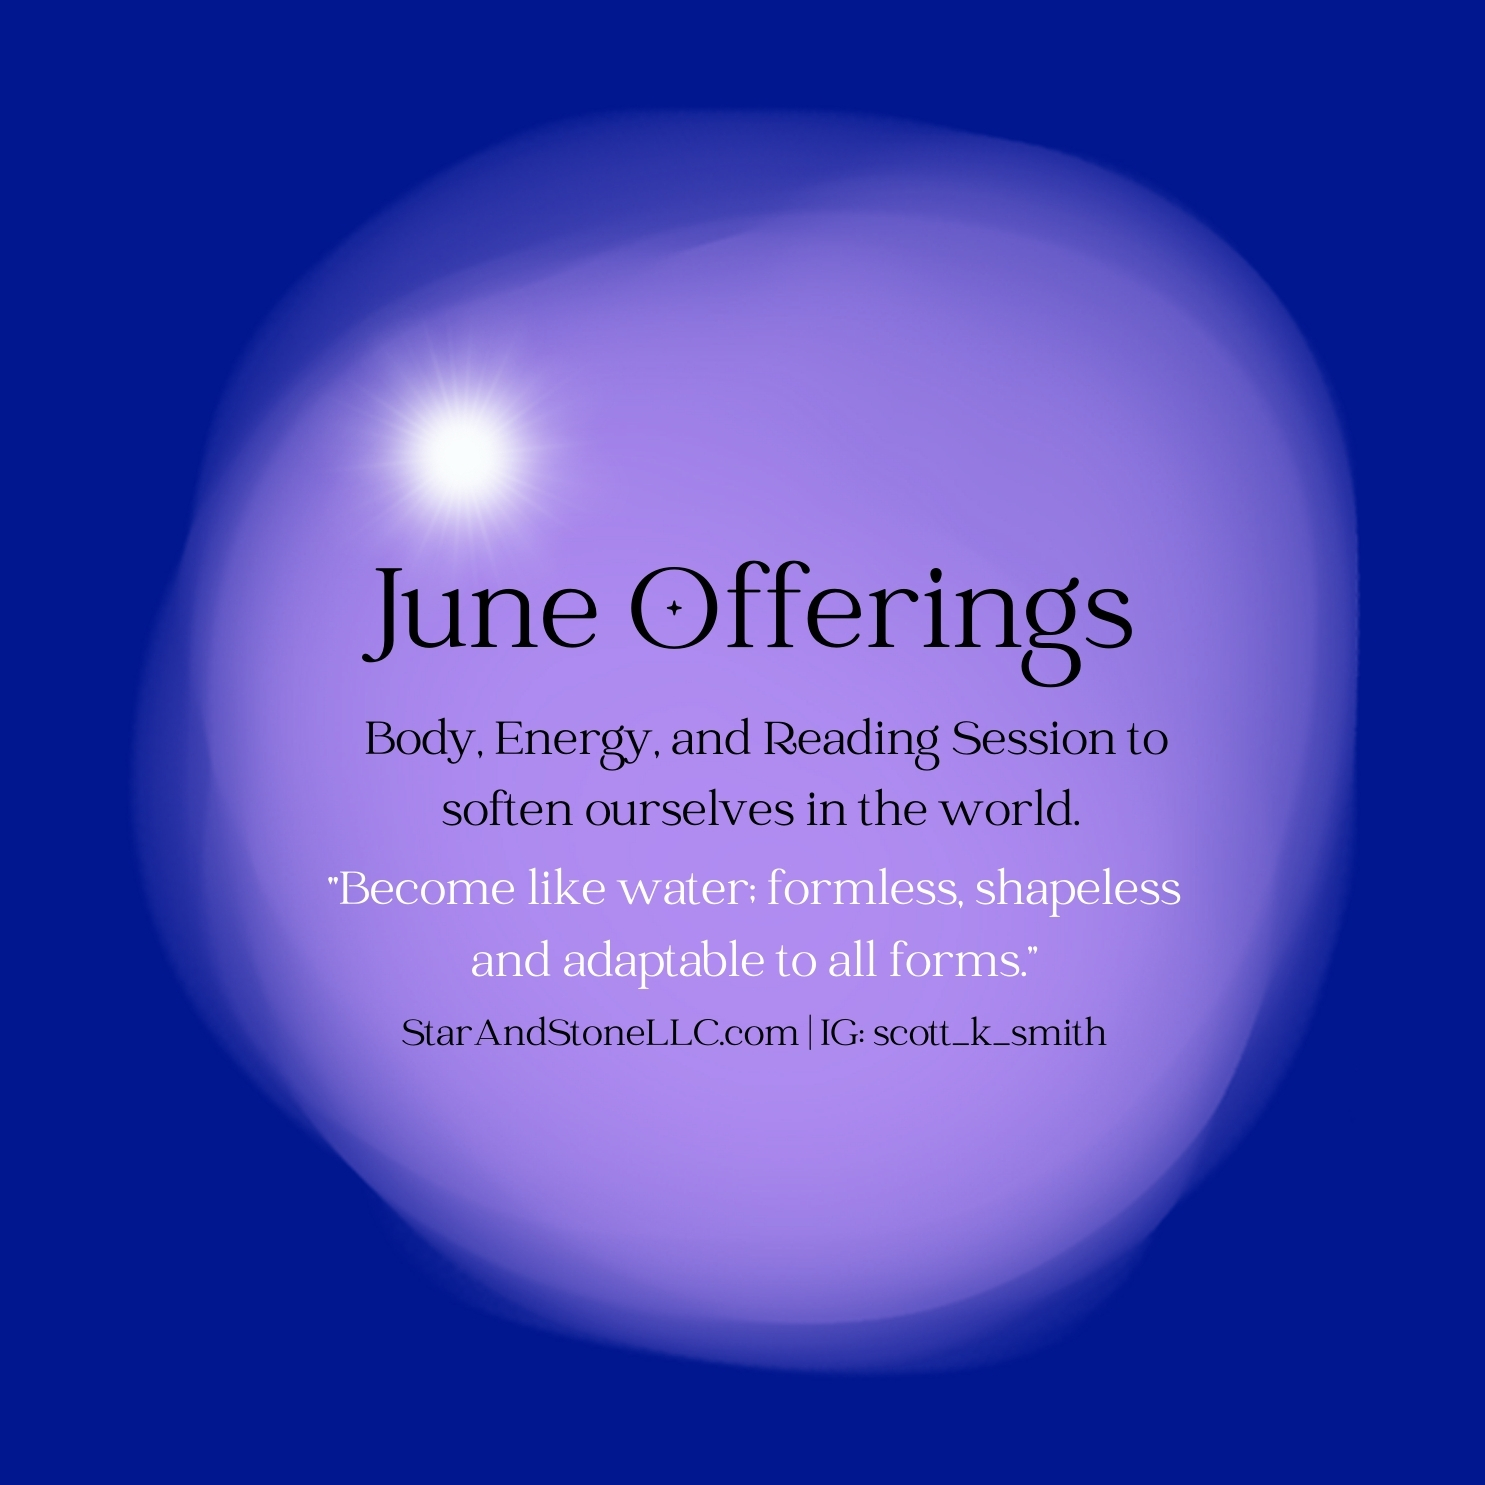 June Services Offerings: Massage, Energy Work, and Readings